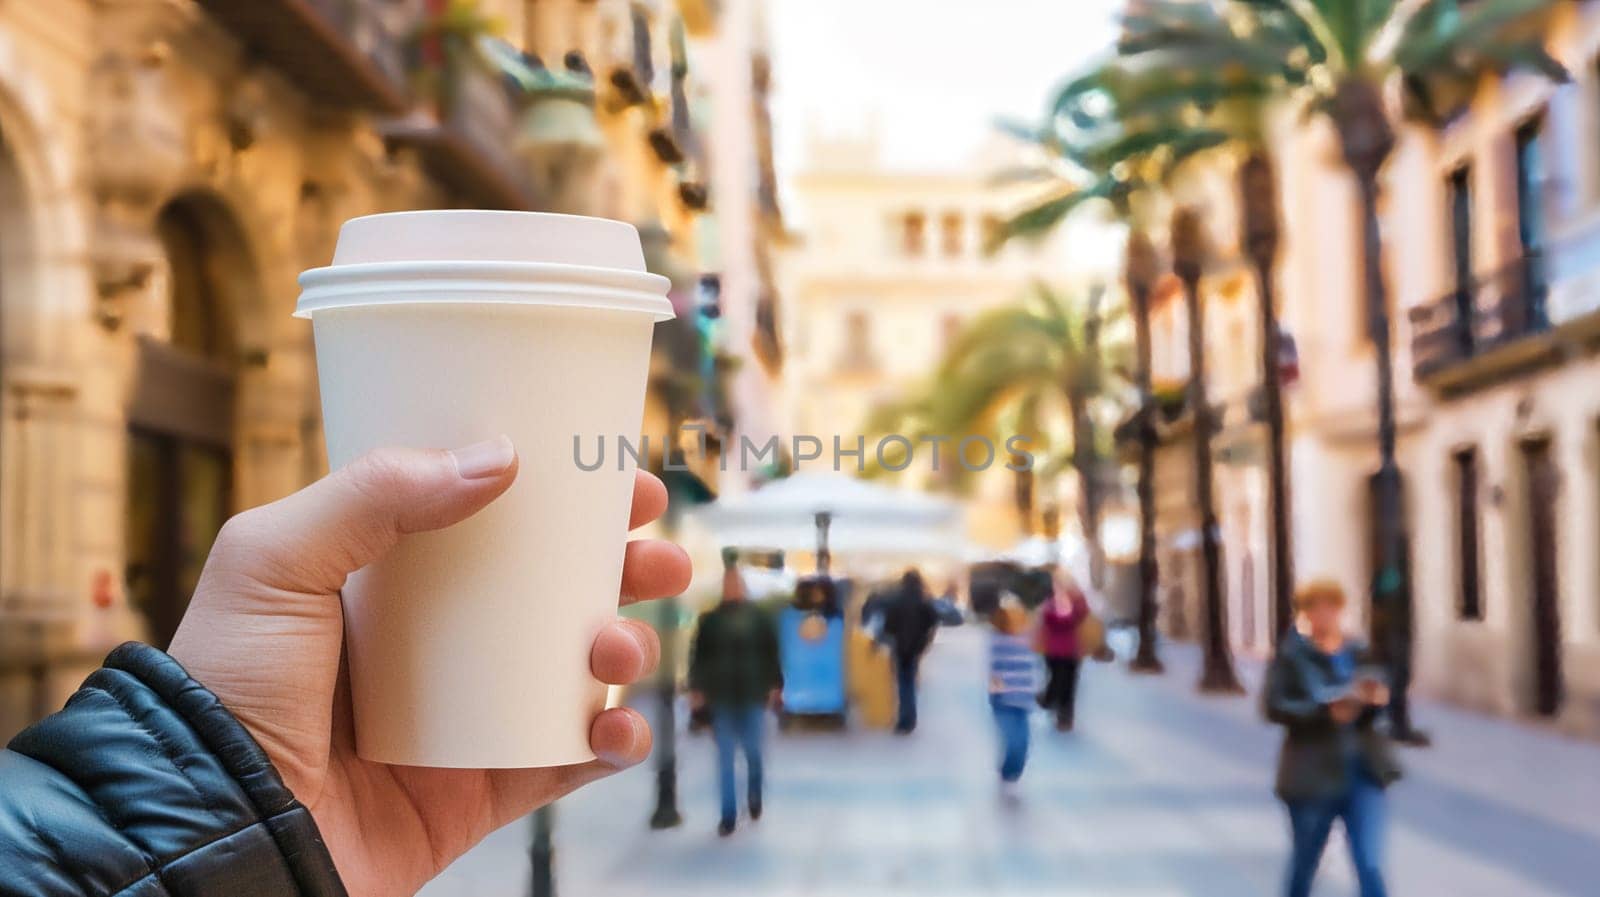 Close-up of hand holding a blank takeaway coffee cup. City life moment captured, perfect for brand mockups, vibrant blurred street scene. Coffee on the go concept.